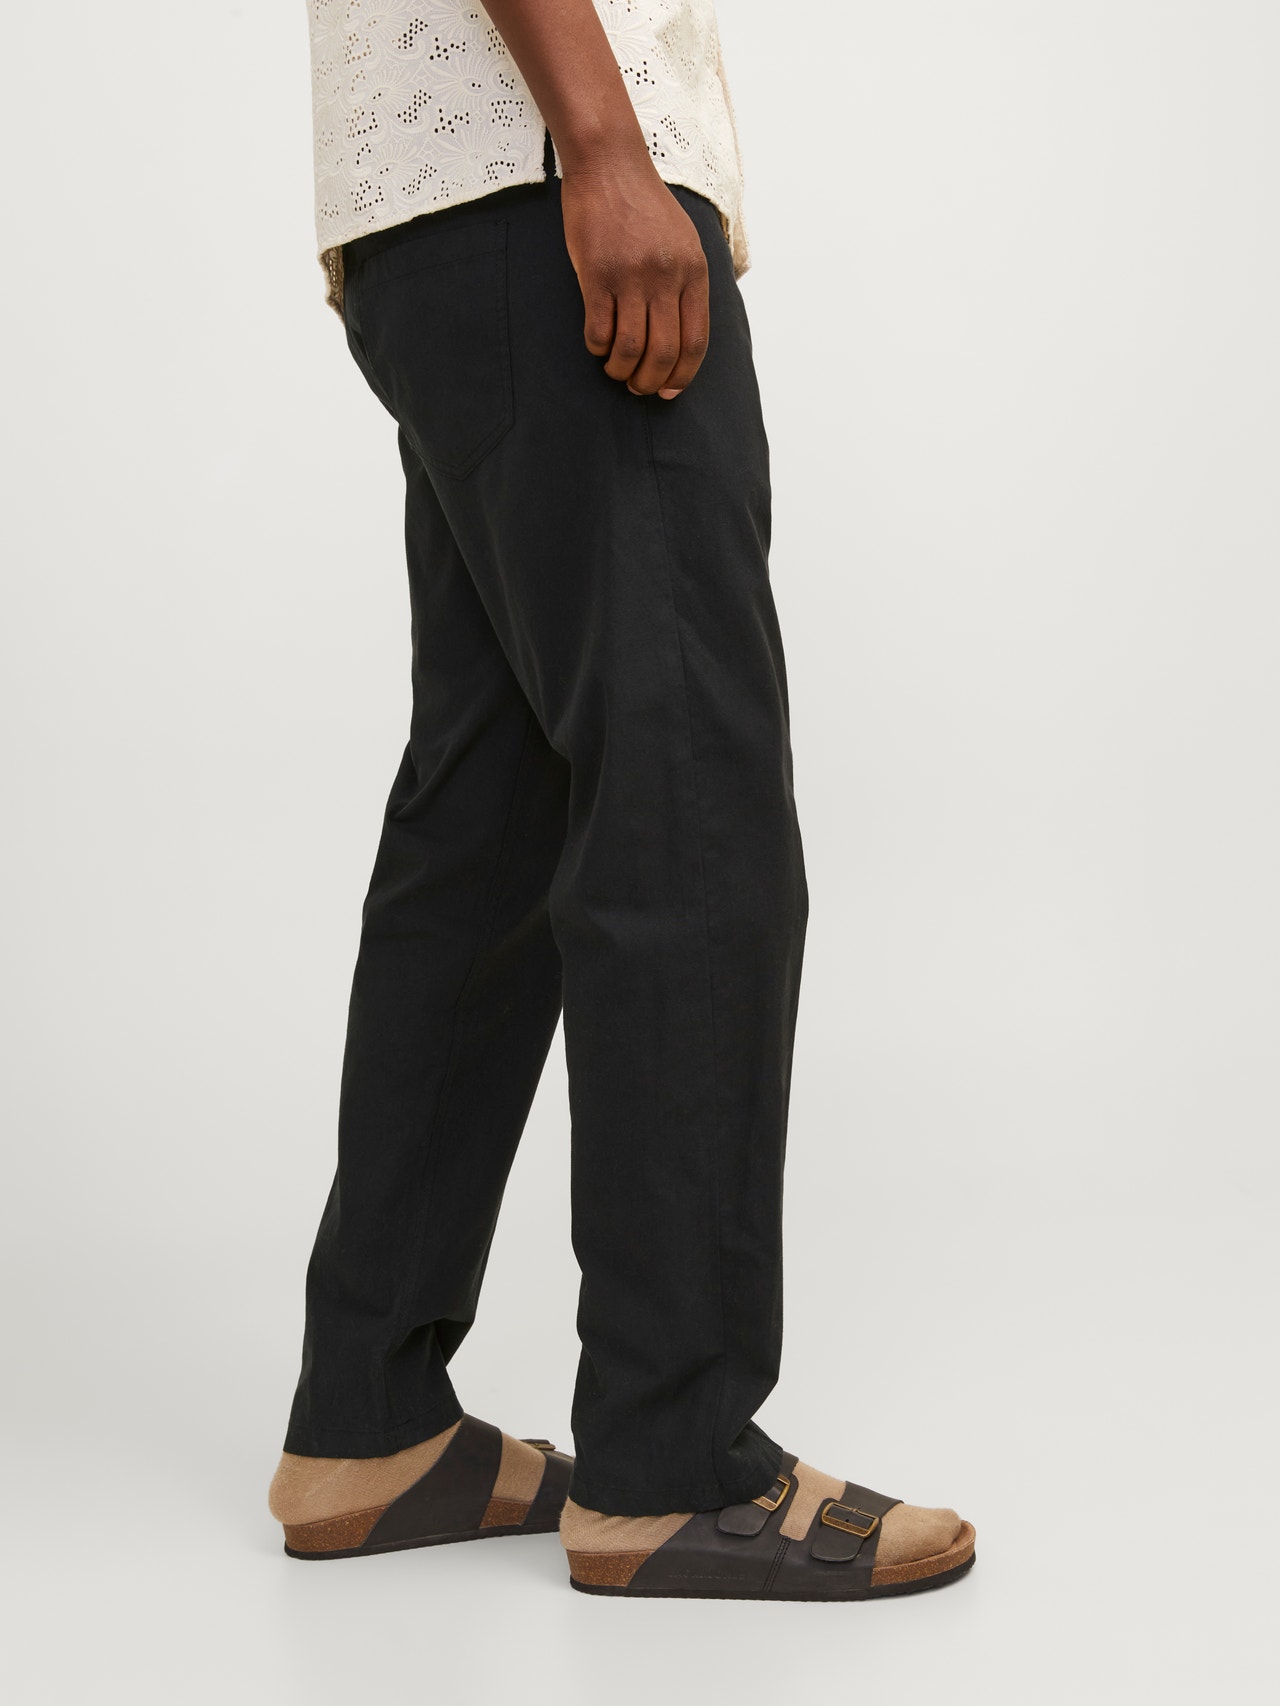 Jack & Jones Relaxed Fit Classic trousers -Black - 12248606